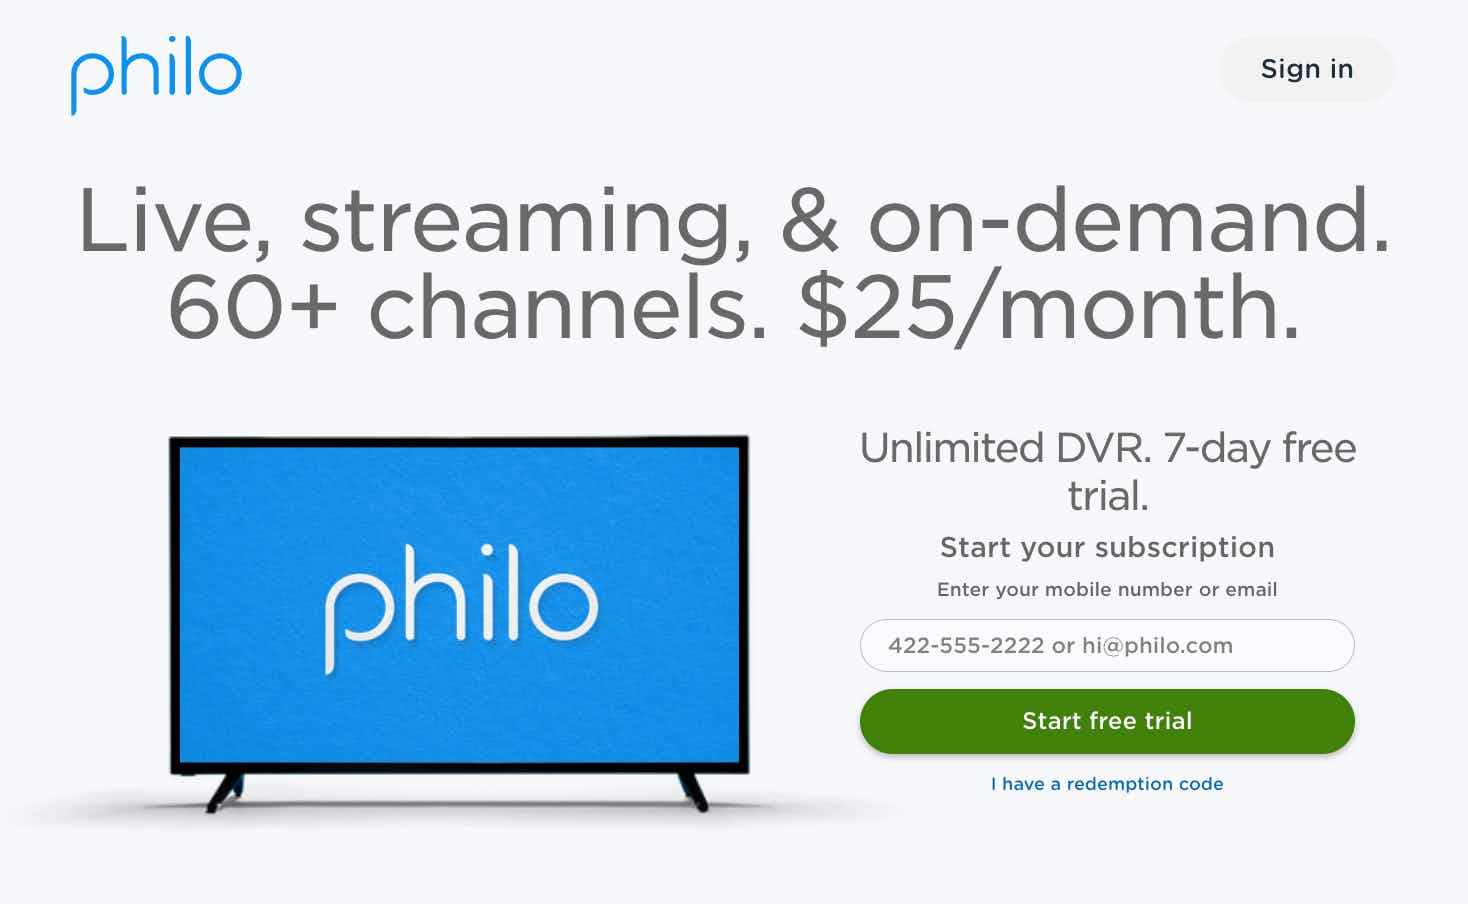 A screenshot from the Philo website's home page with the offer for a free trial.